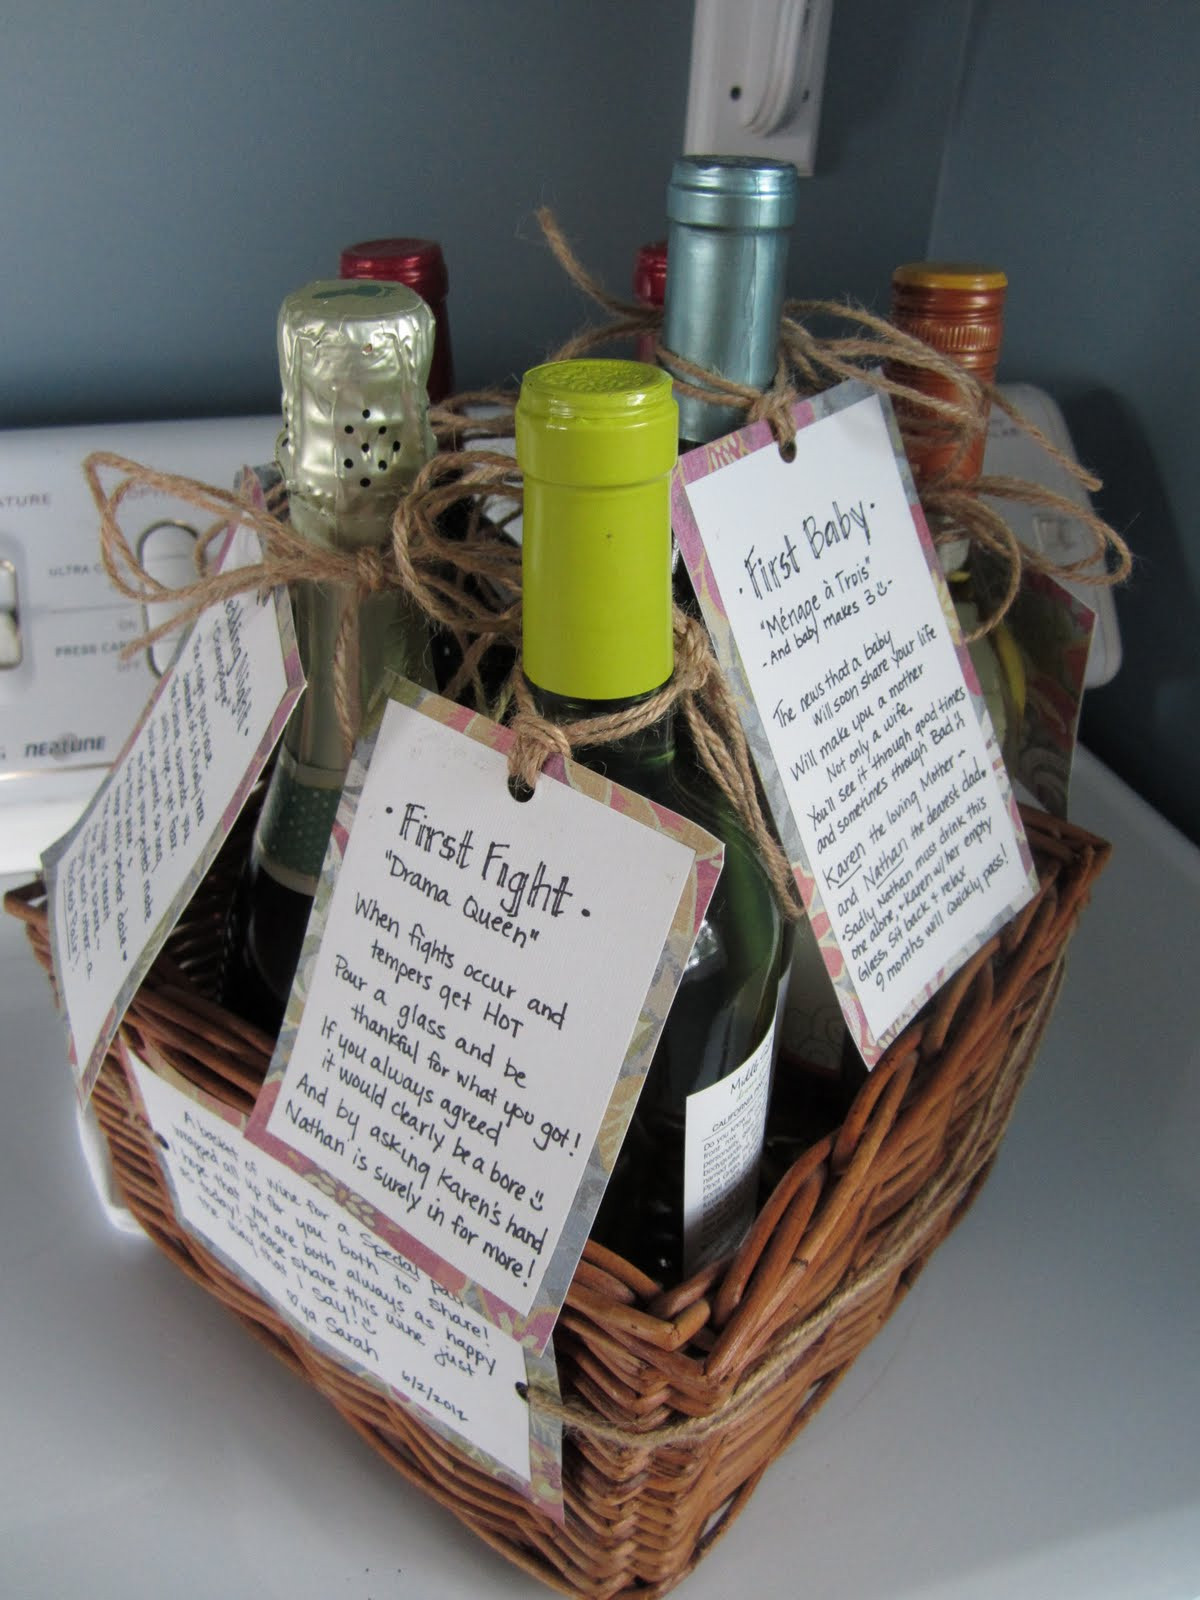 Ideas For Wedding Gift
 5 Thoughtful Wedding Shower Gifts that Might Not Be on the